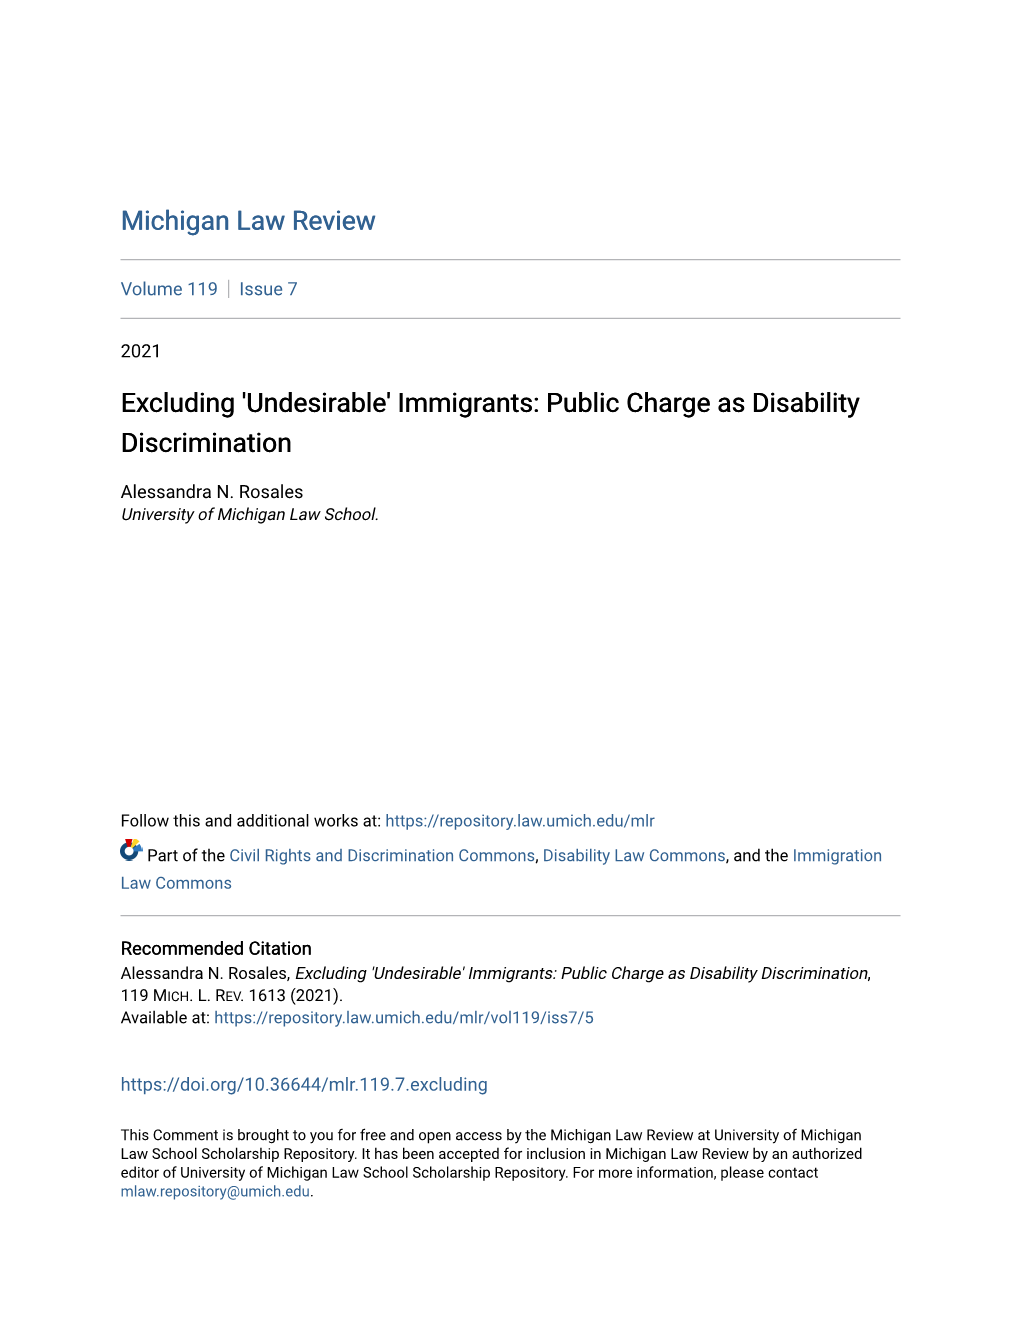 Immigrants: Public Charge As Disability Discrimination